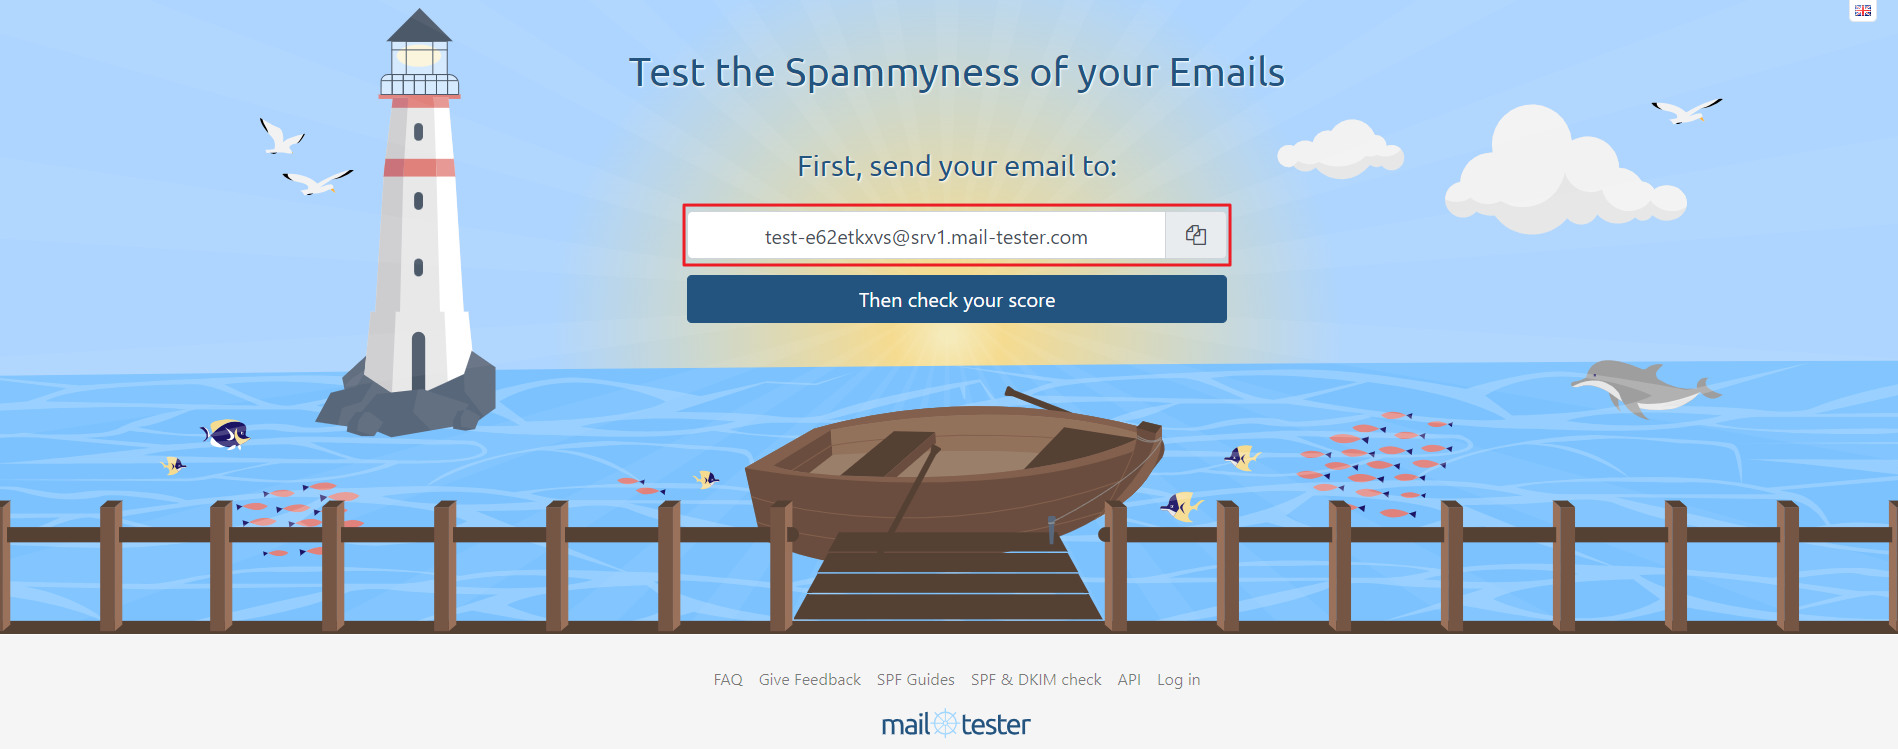 Copying the email address link from mail-tester.com